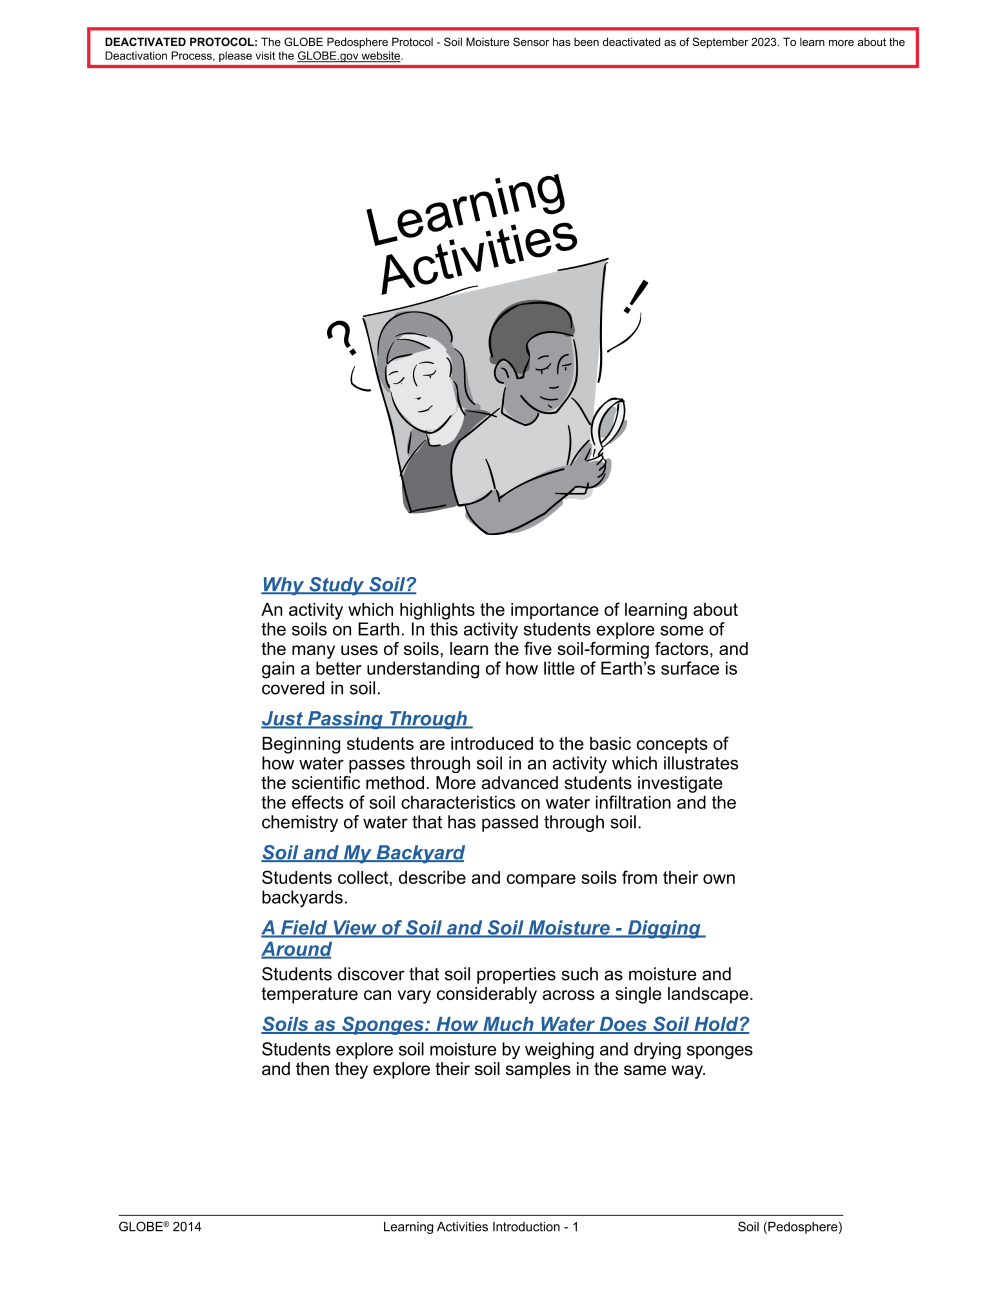 Learning Activities preview for Soil Learning Activities Introduction